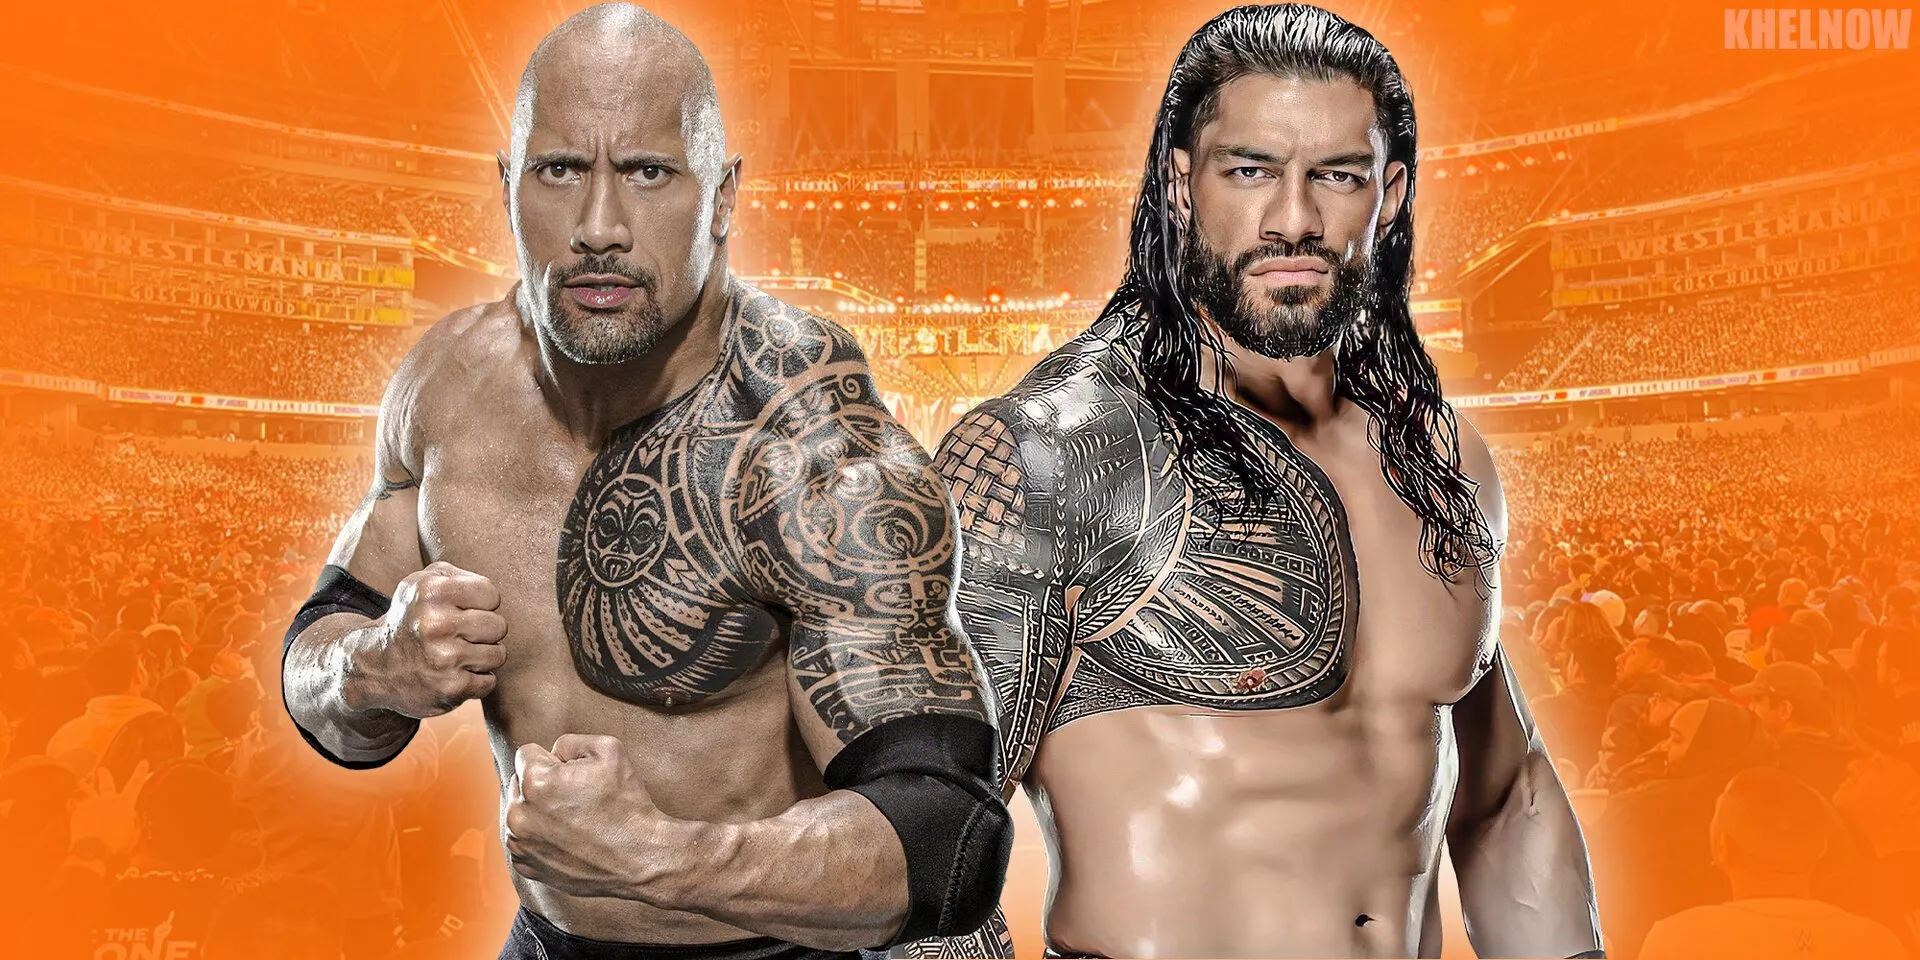 5 Key Signs The Rock Will Return To WWE And Face Roman Reigns